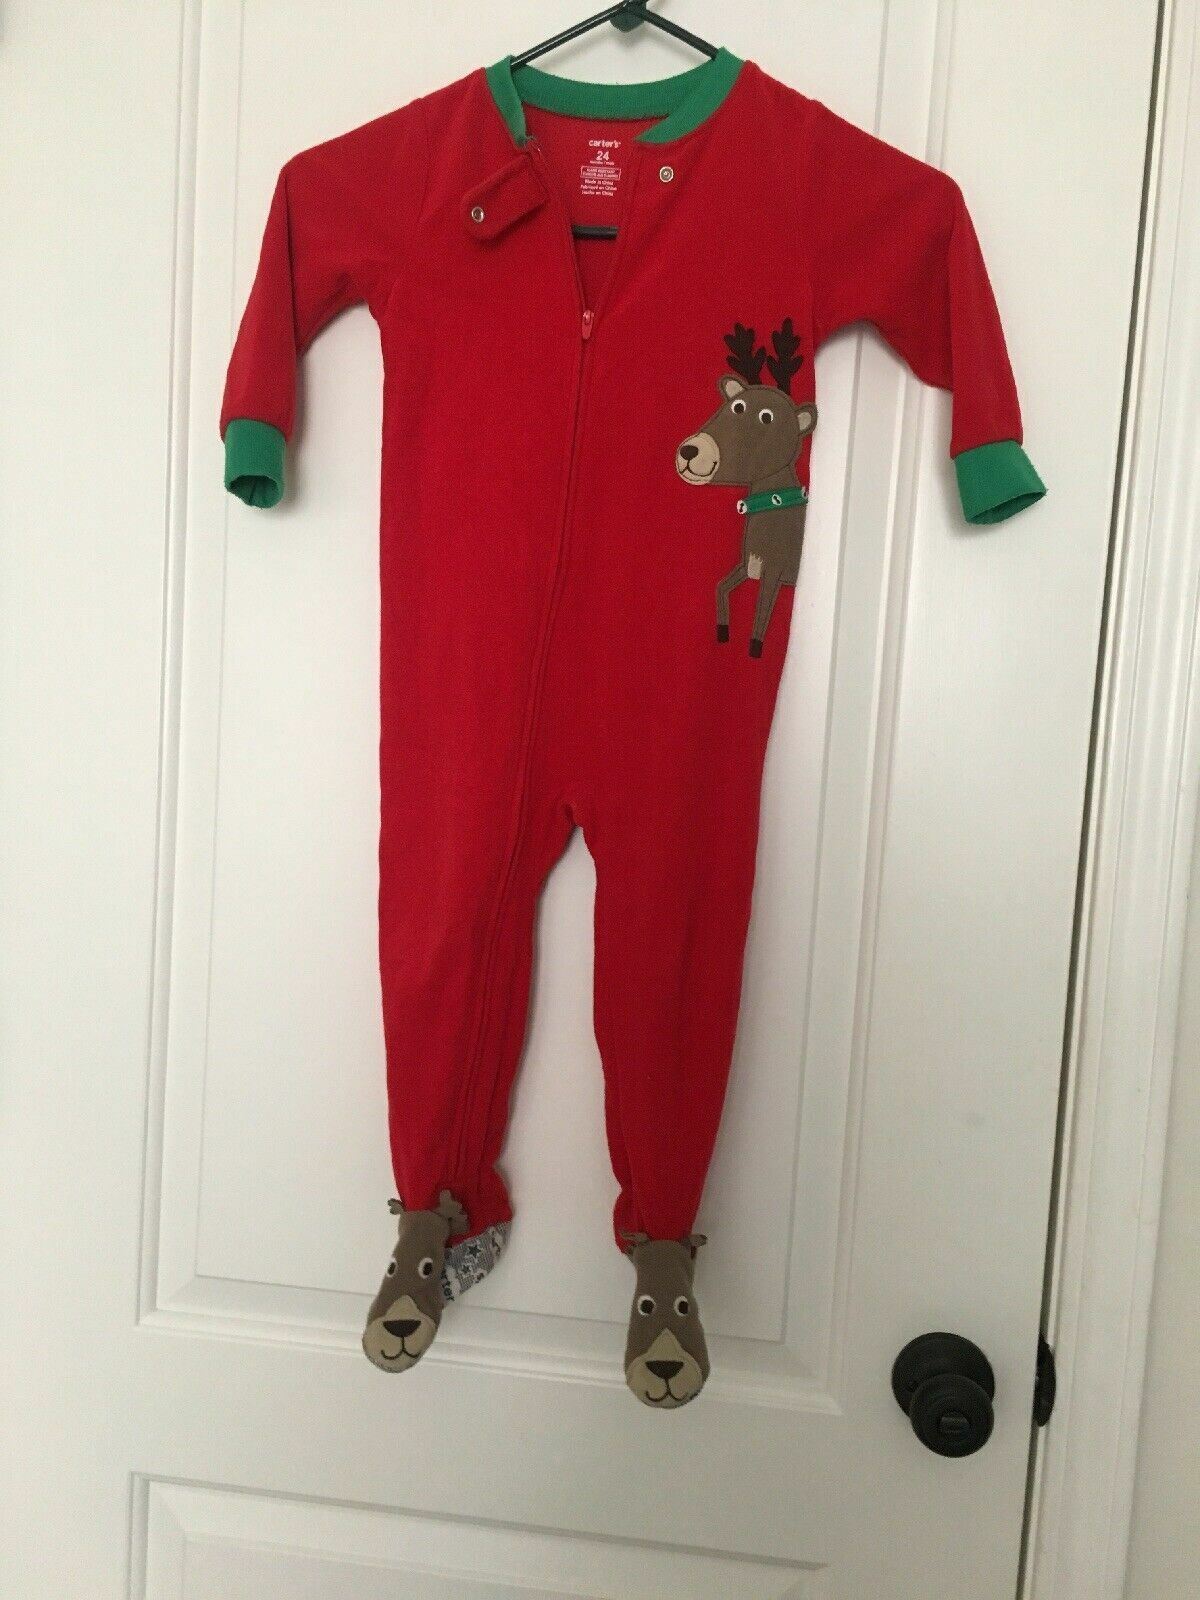 1 Pc Carter's Unisex Toddler Baby Reindeer Footed Pajamas  Pjs Size 24 Months - $30.75